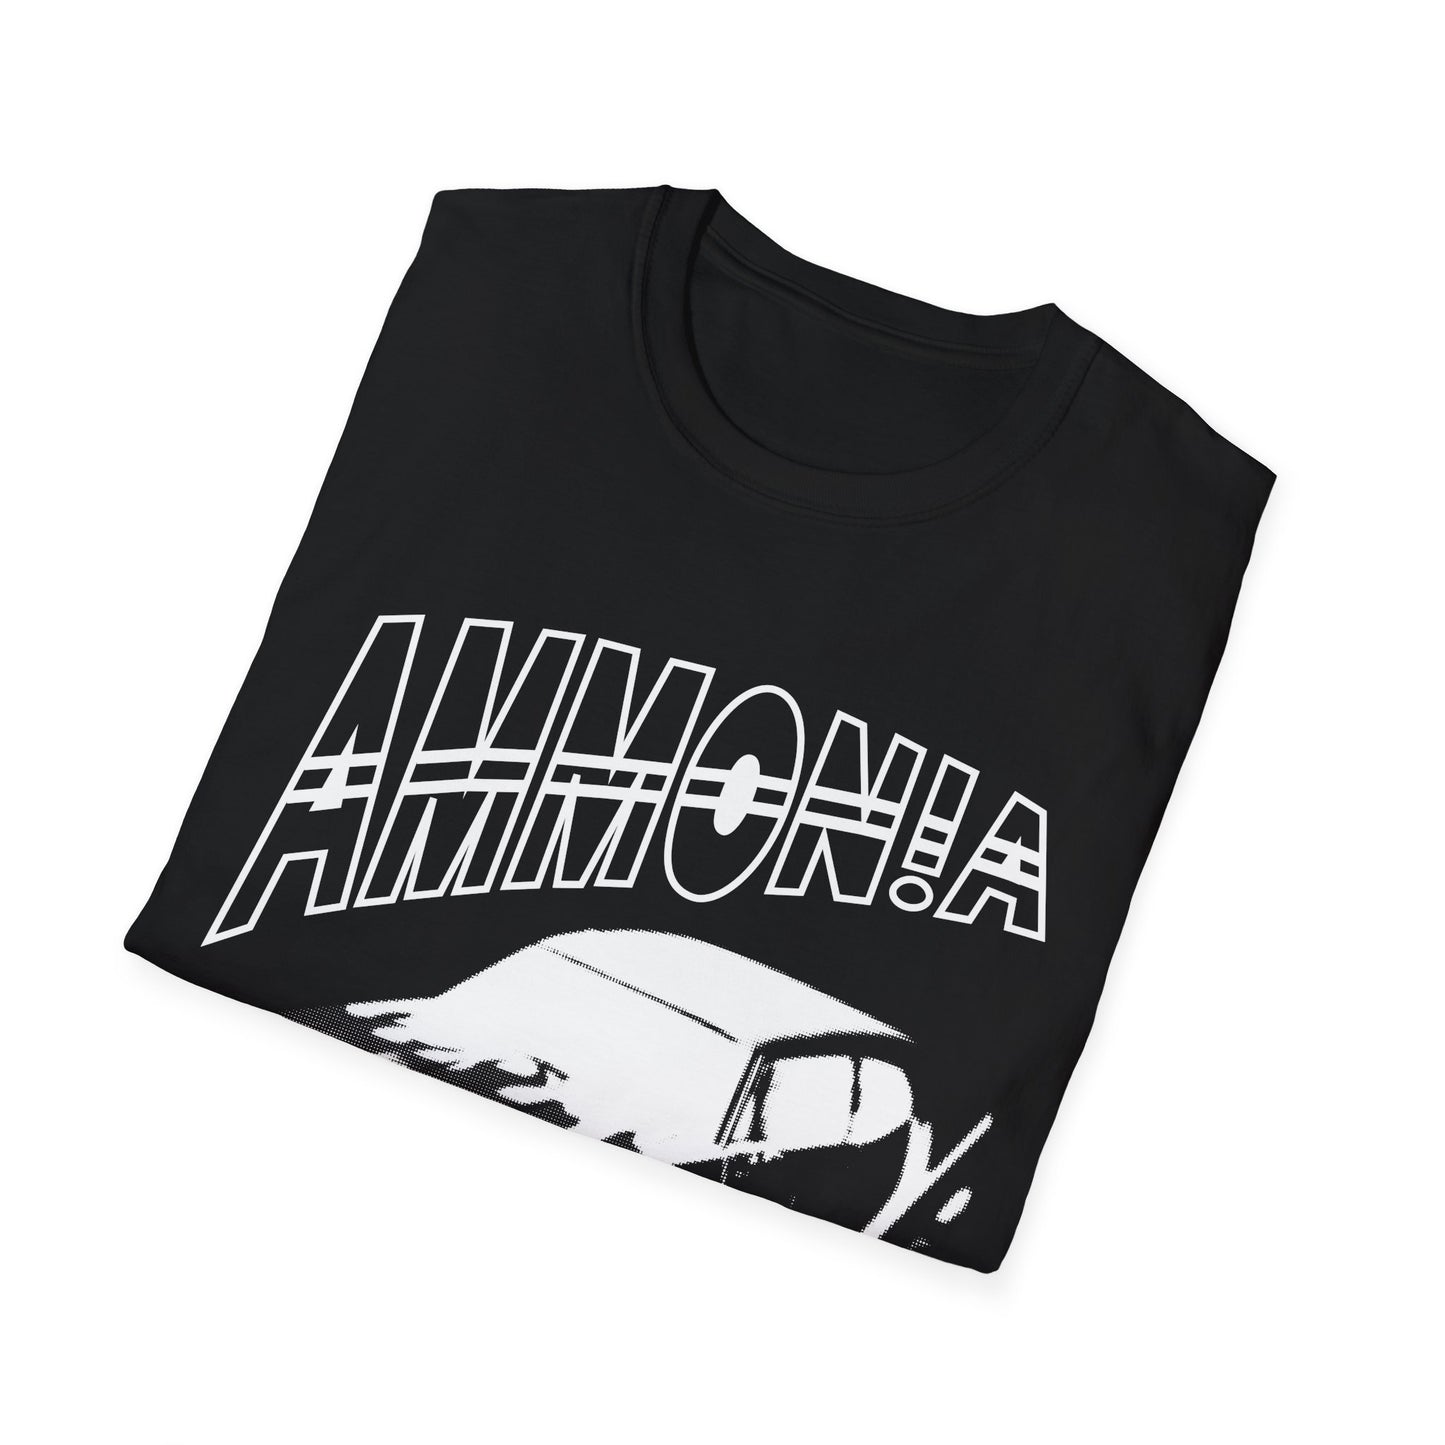 Ammonia Mint 400 - Special Edition T-Shirt